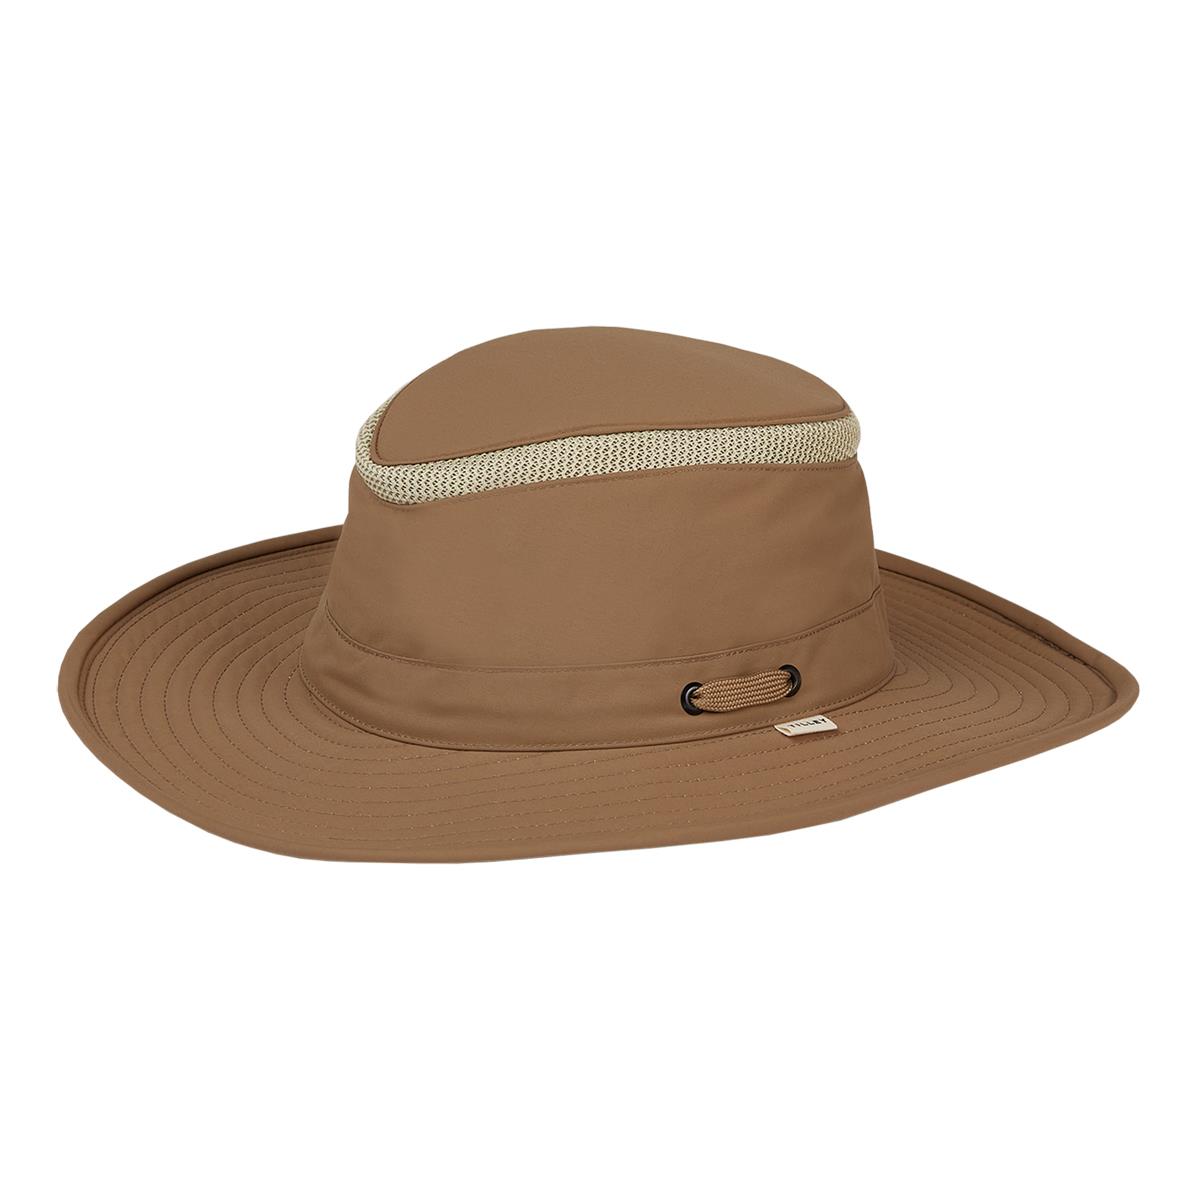 Does the Tilley Airflo Hat securely withstand windy conditions?